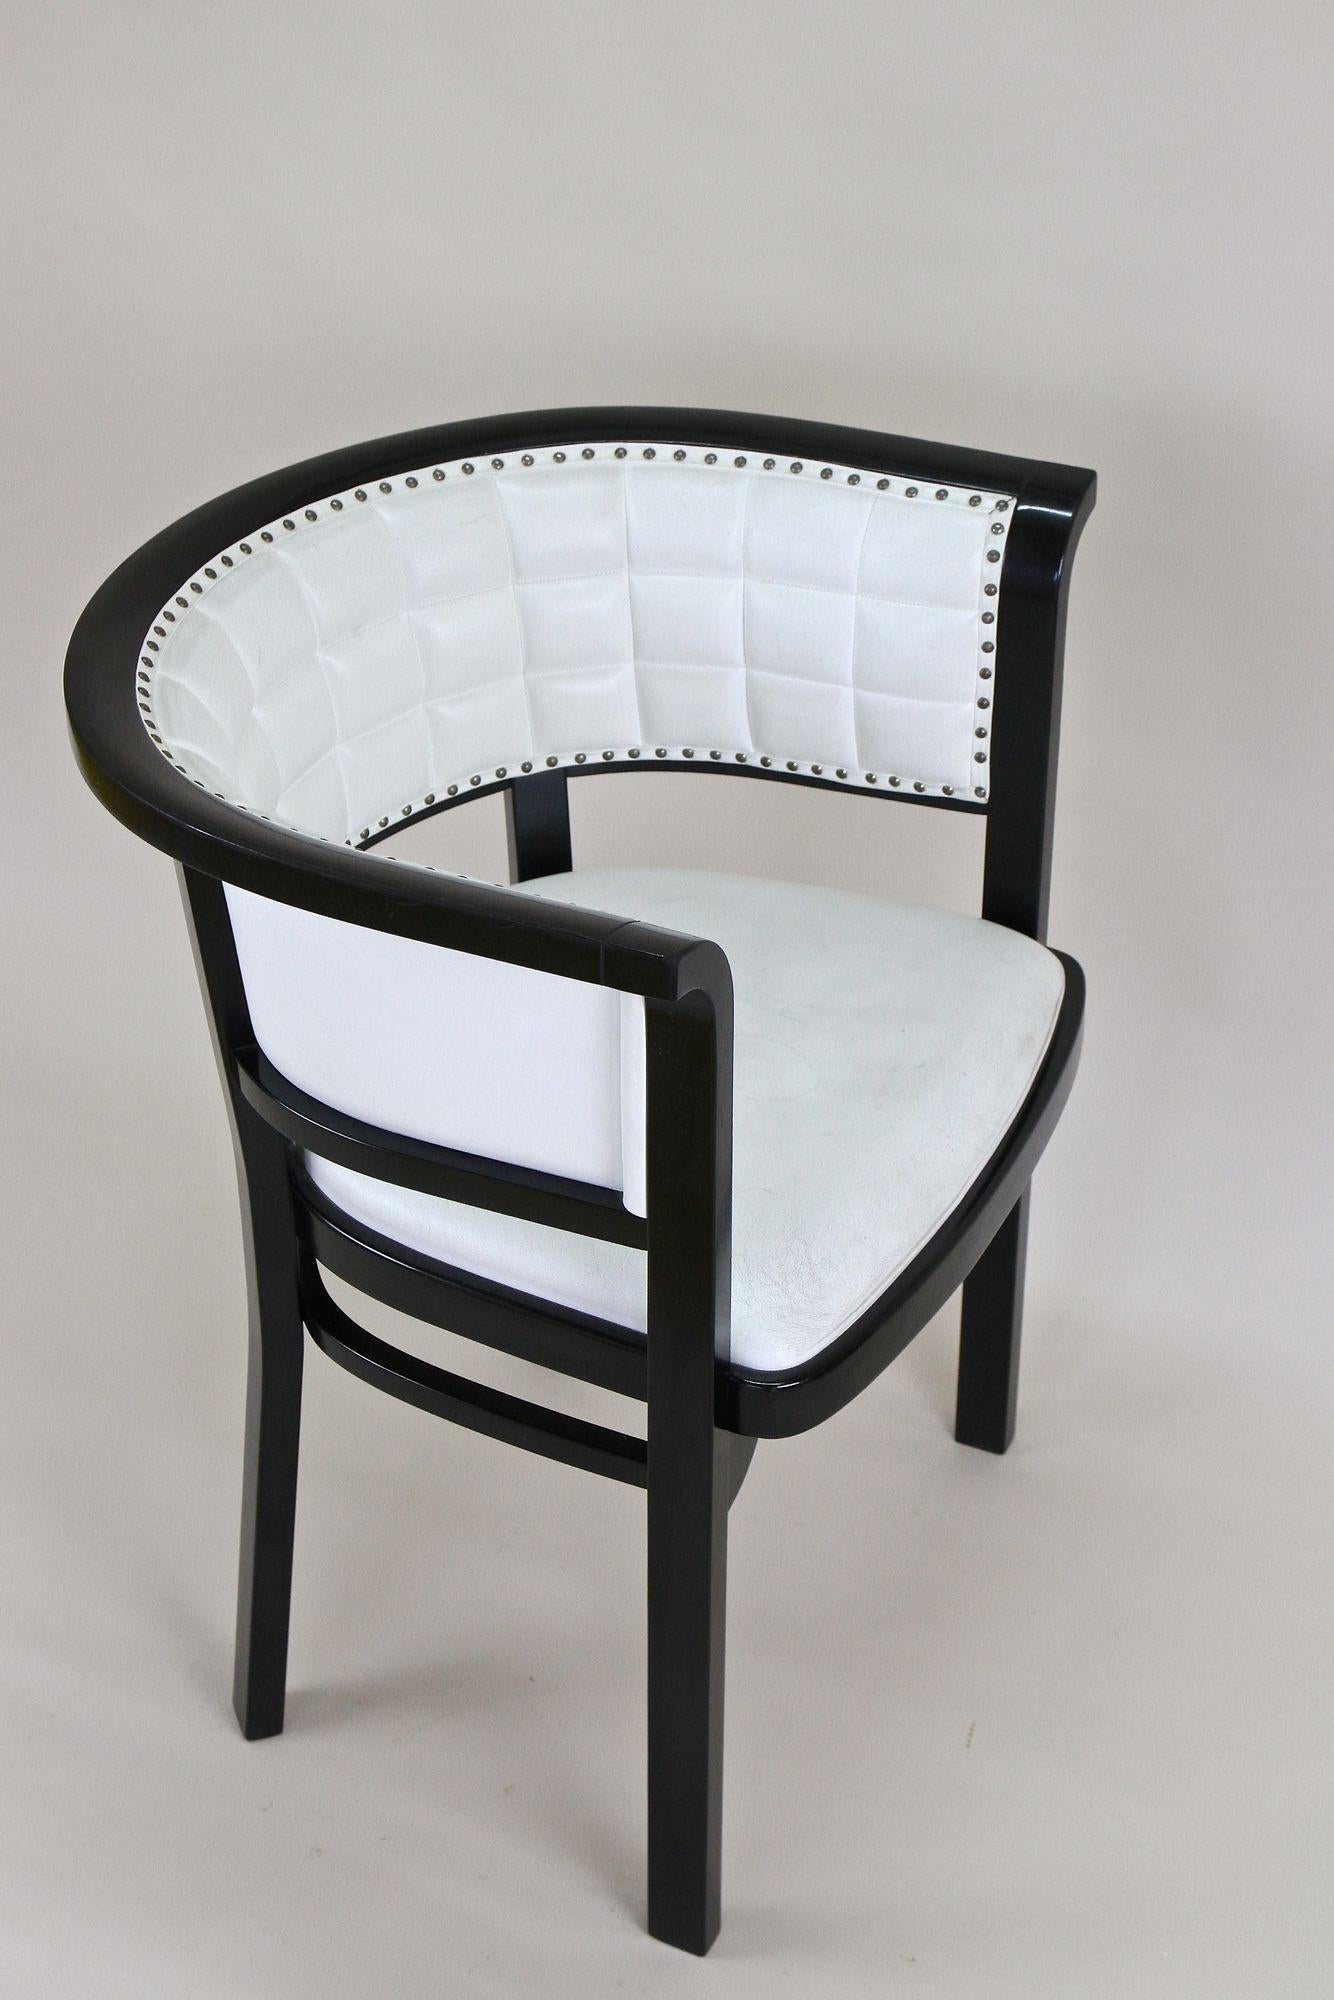 Black Thonet Armchair with White Leather, Design Marcel Kammerer, at circa 1980 For Sale 7